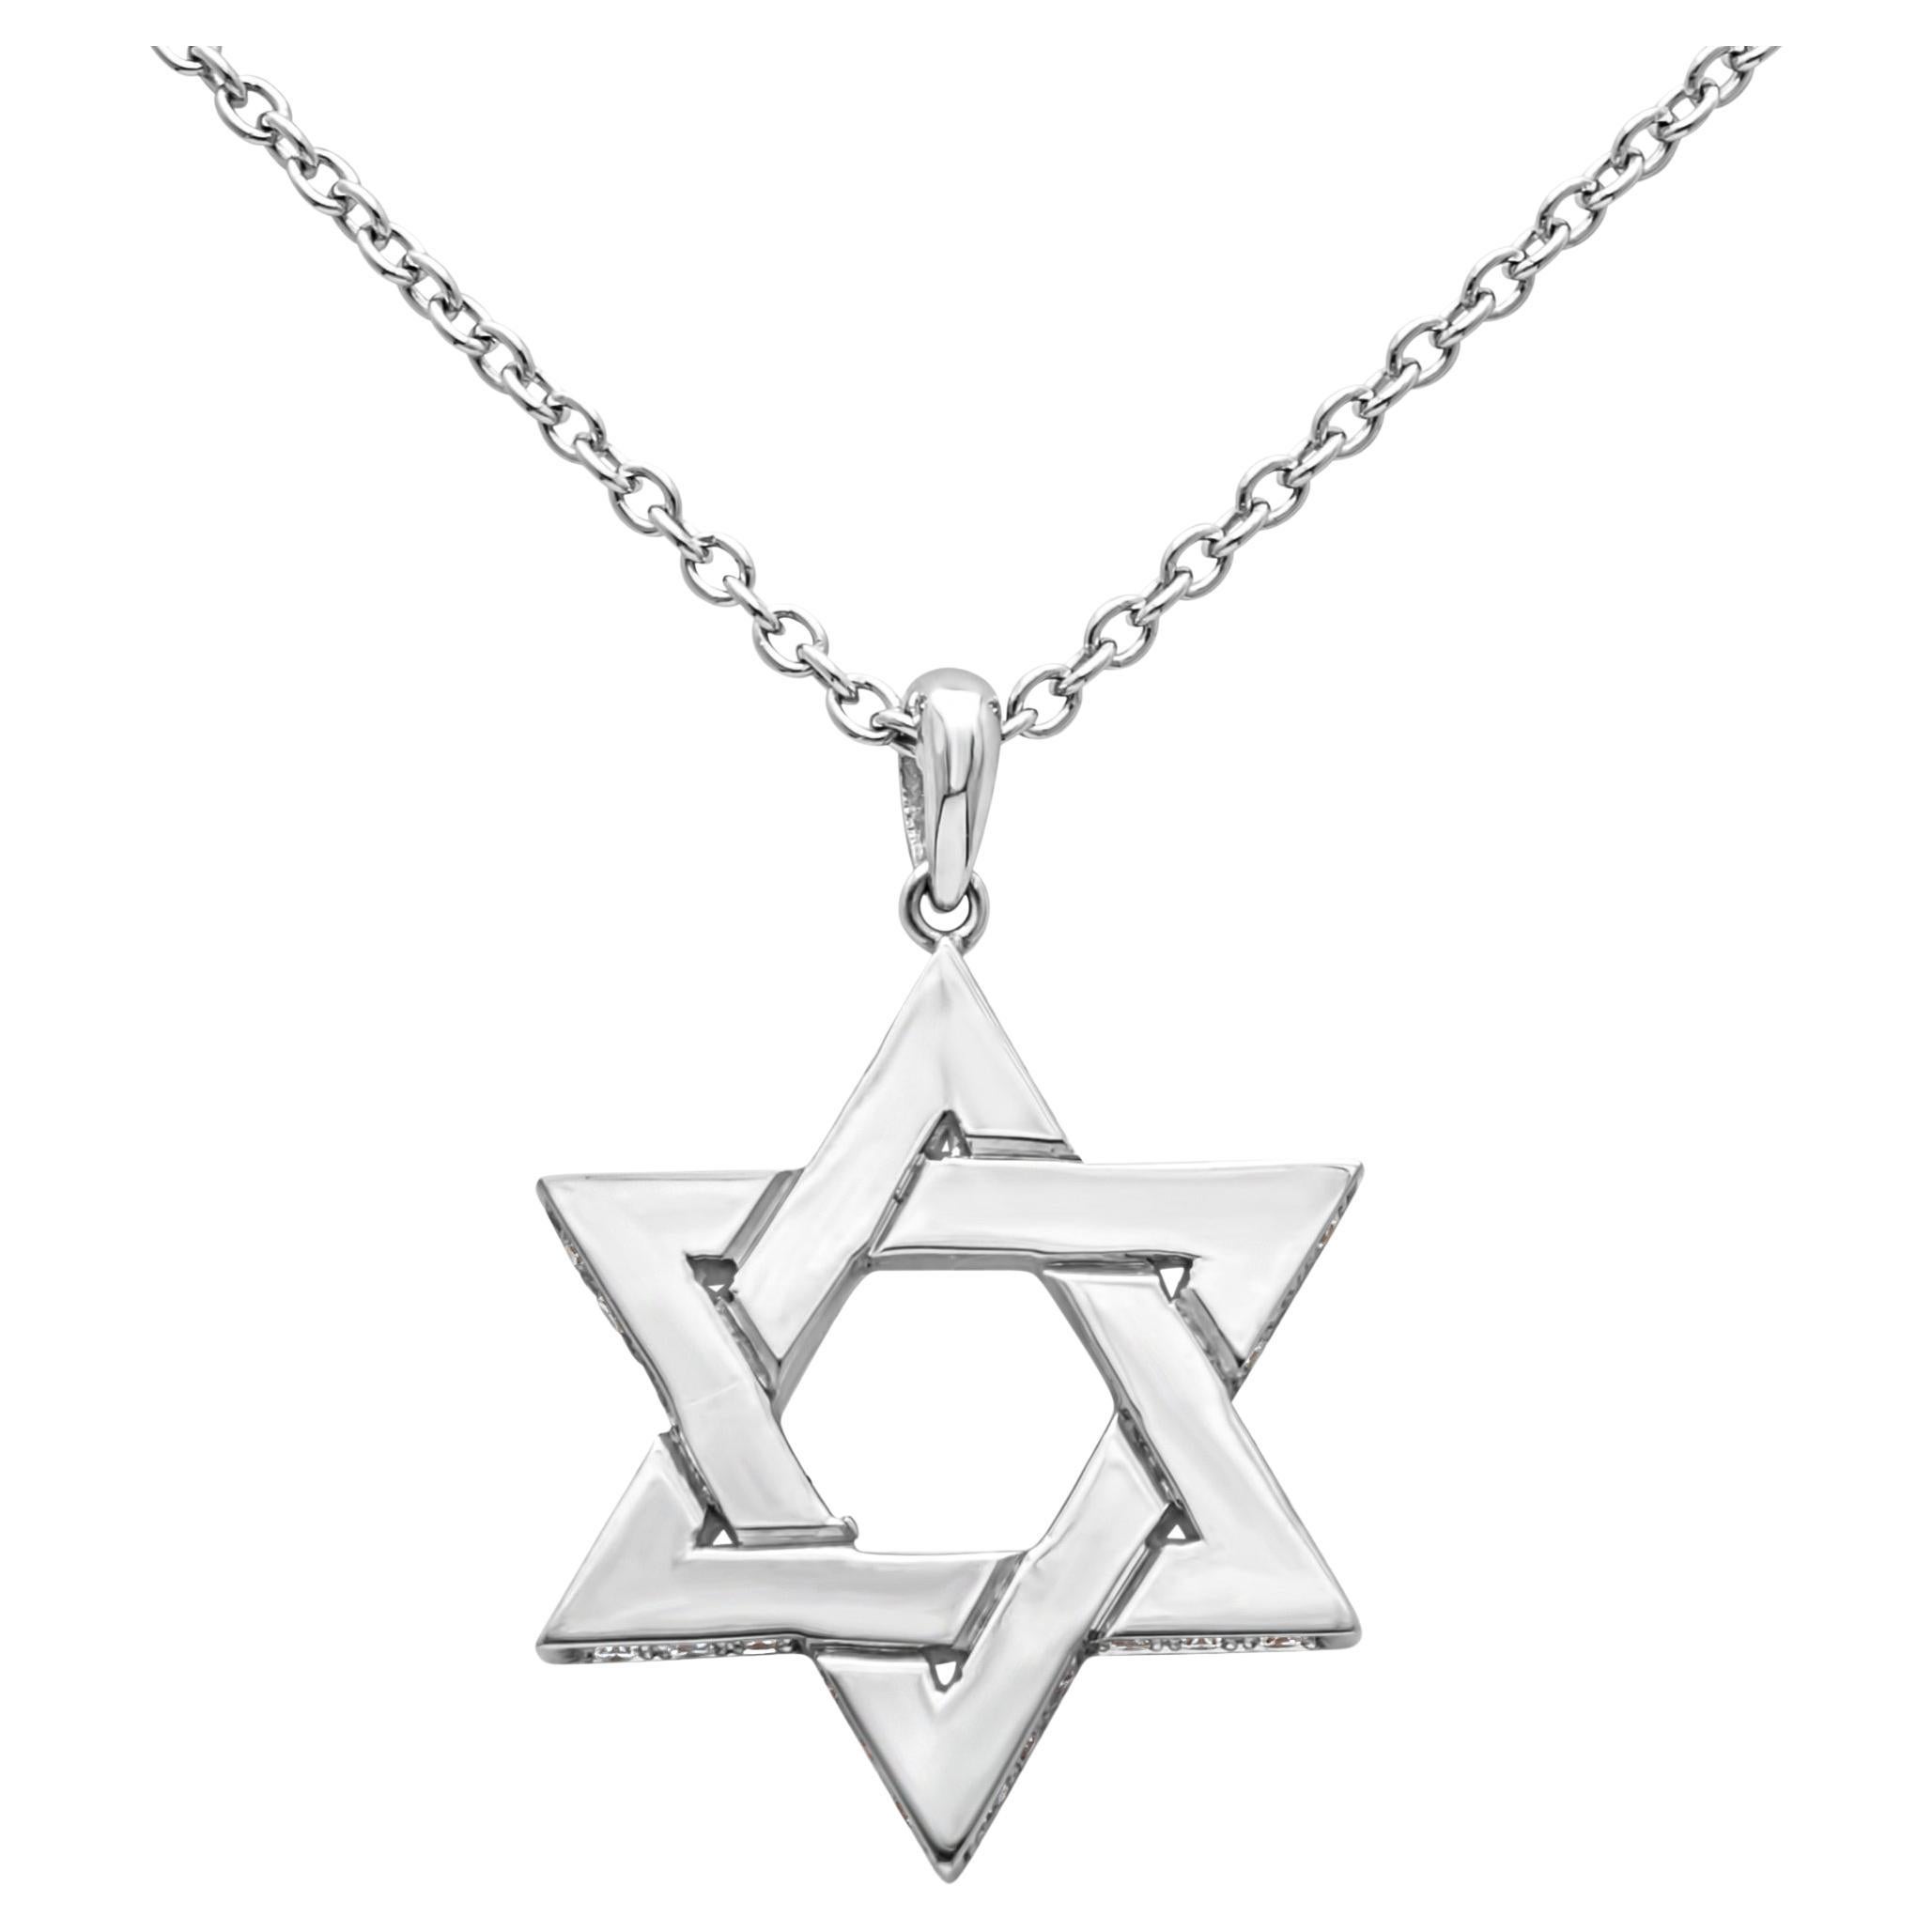 A simple Star of David pendant made in solid Platinum accented with round diamonds on each side of the star weighing 0.25 carats total, F color and VS in clarity.  Suspended on an 18 inch chain, adjustable upon request. 

Roman Malakov is a custom